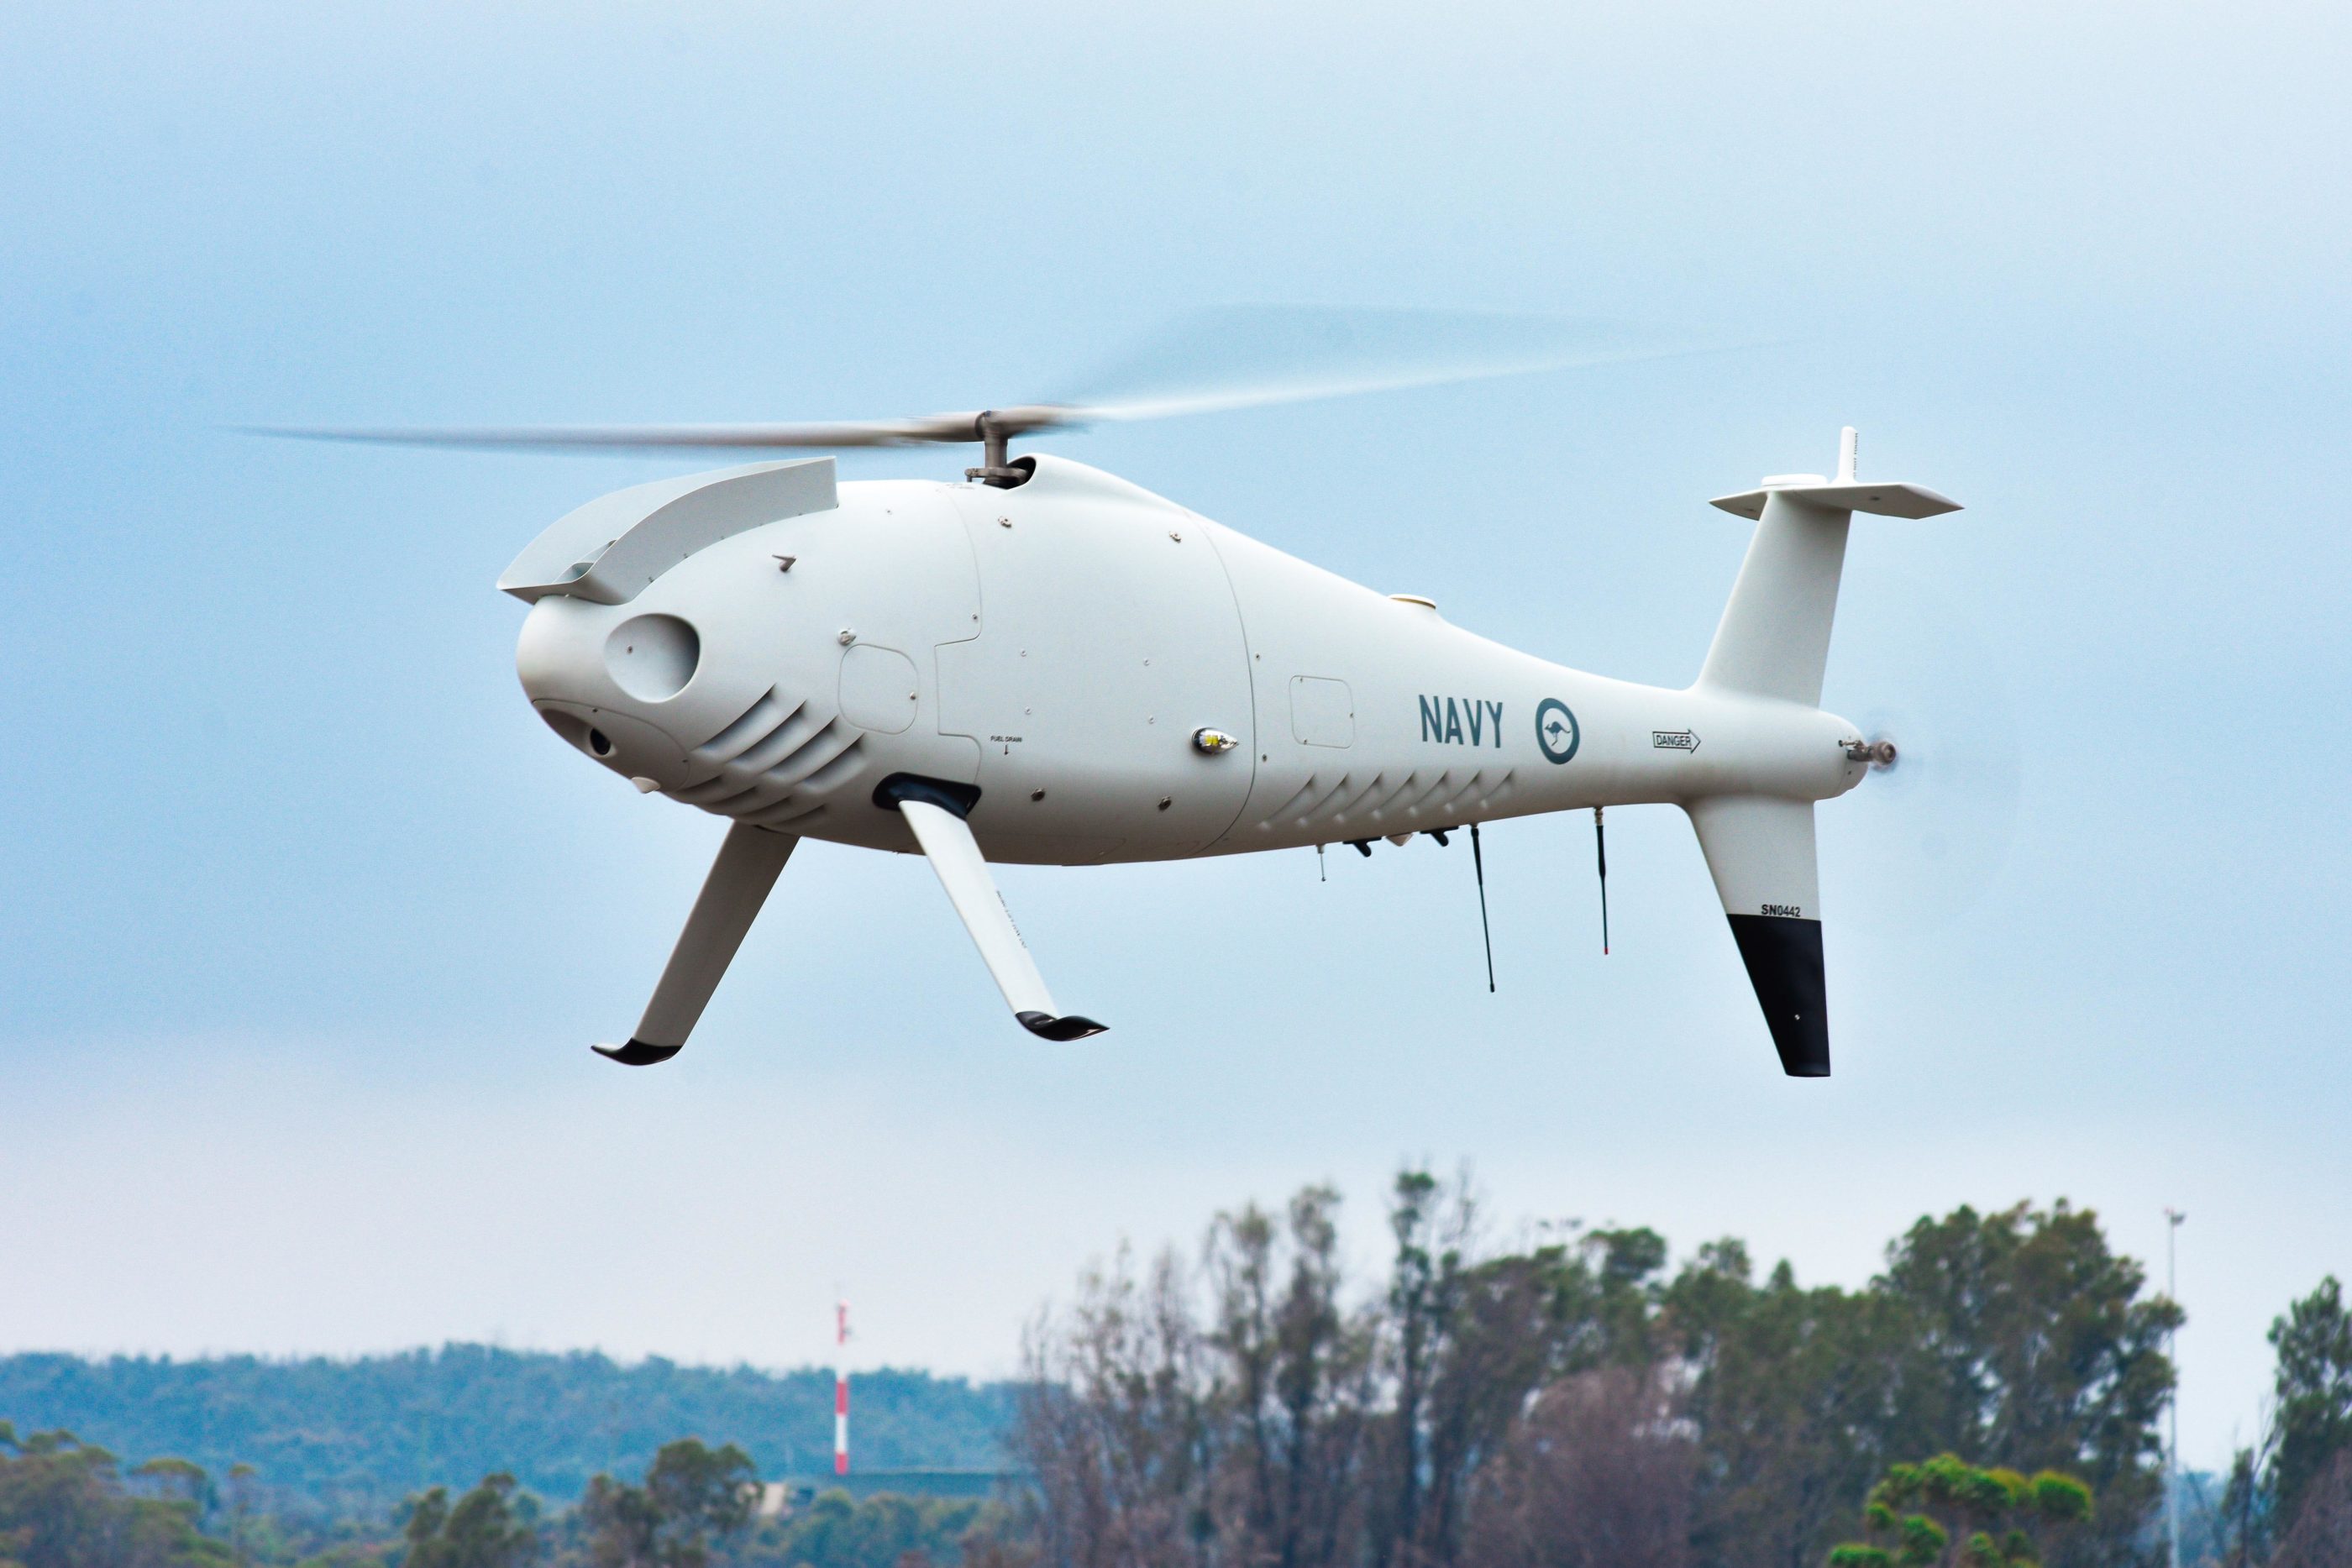 The Camcopter S-100 system has been equipped with an L3 Harris Wescam MX-10, among other things. Schiebel Photo